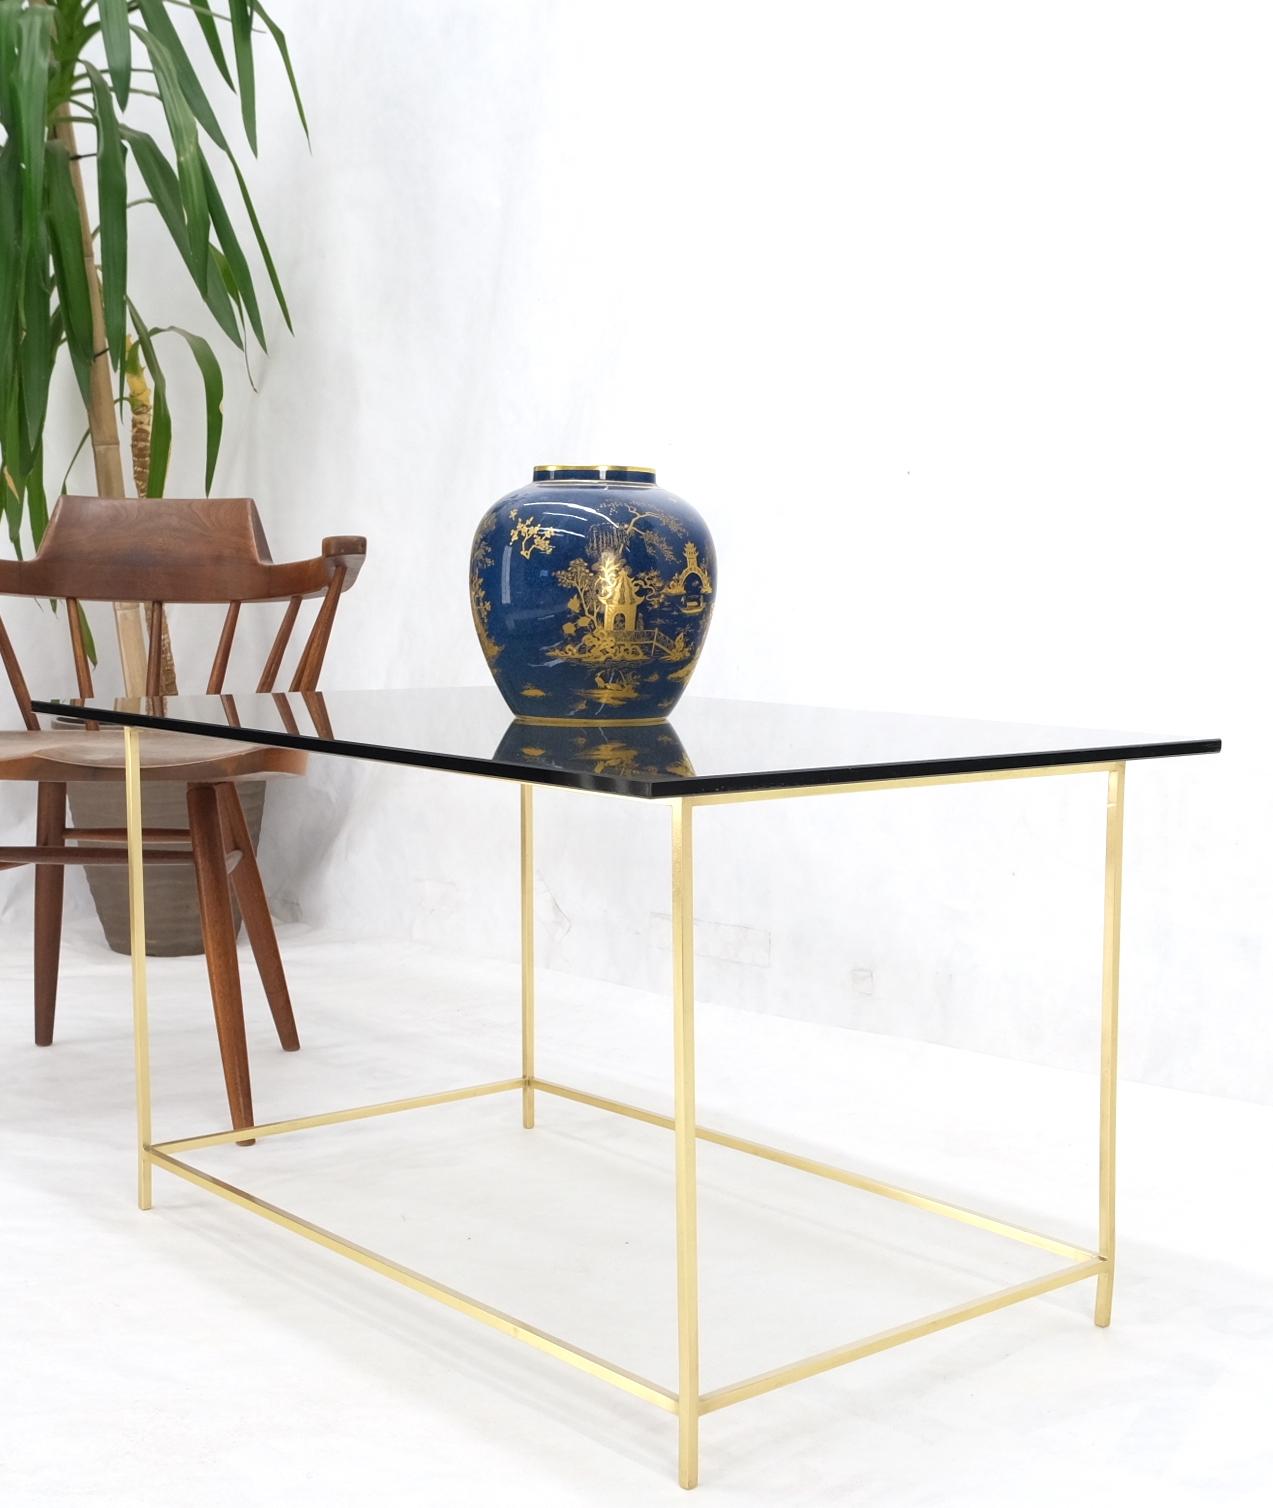 Square Solid Brass Bar Profile Base Rectangle Smoked Glass Top Coffee Side Table.
Glass Measures 1/2'' in thickness.
 